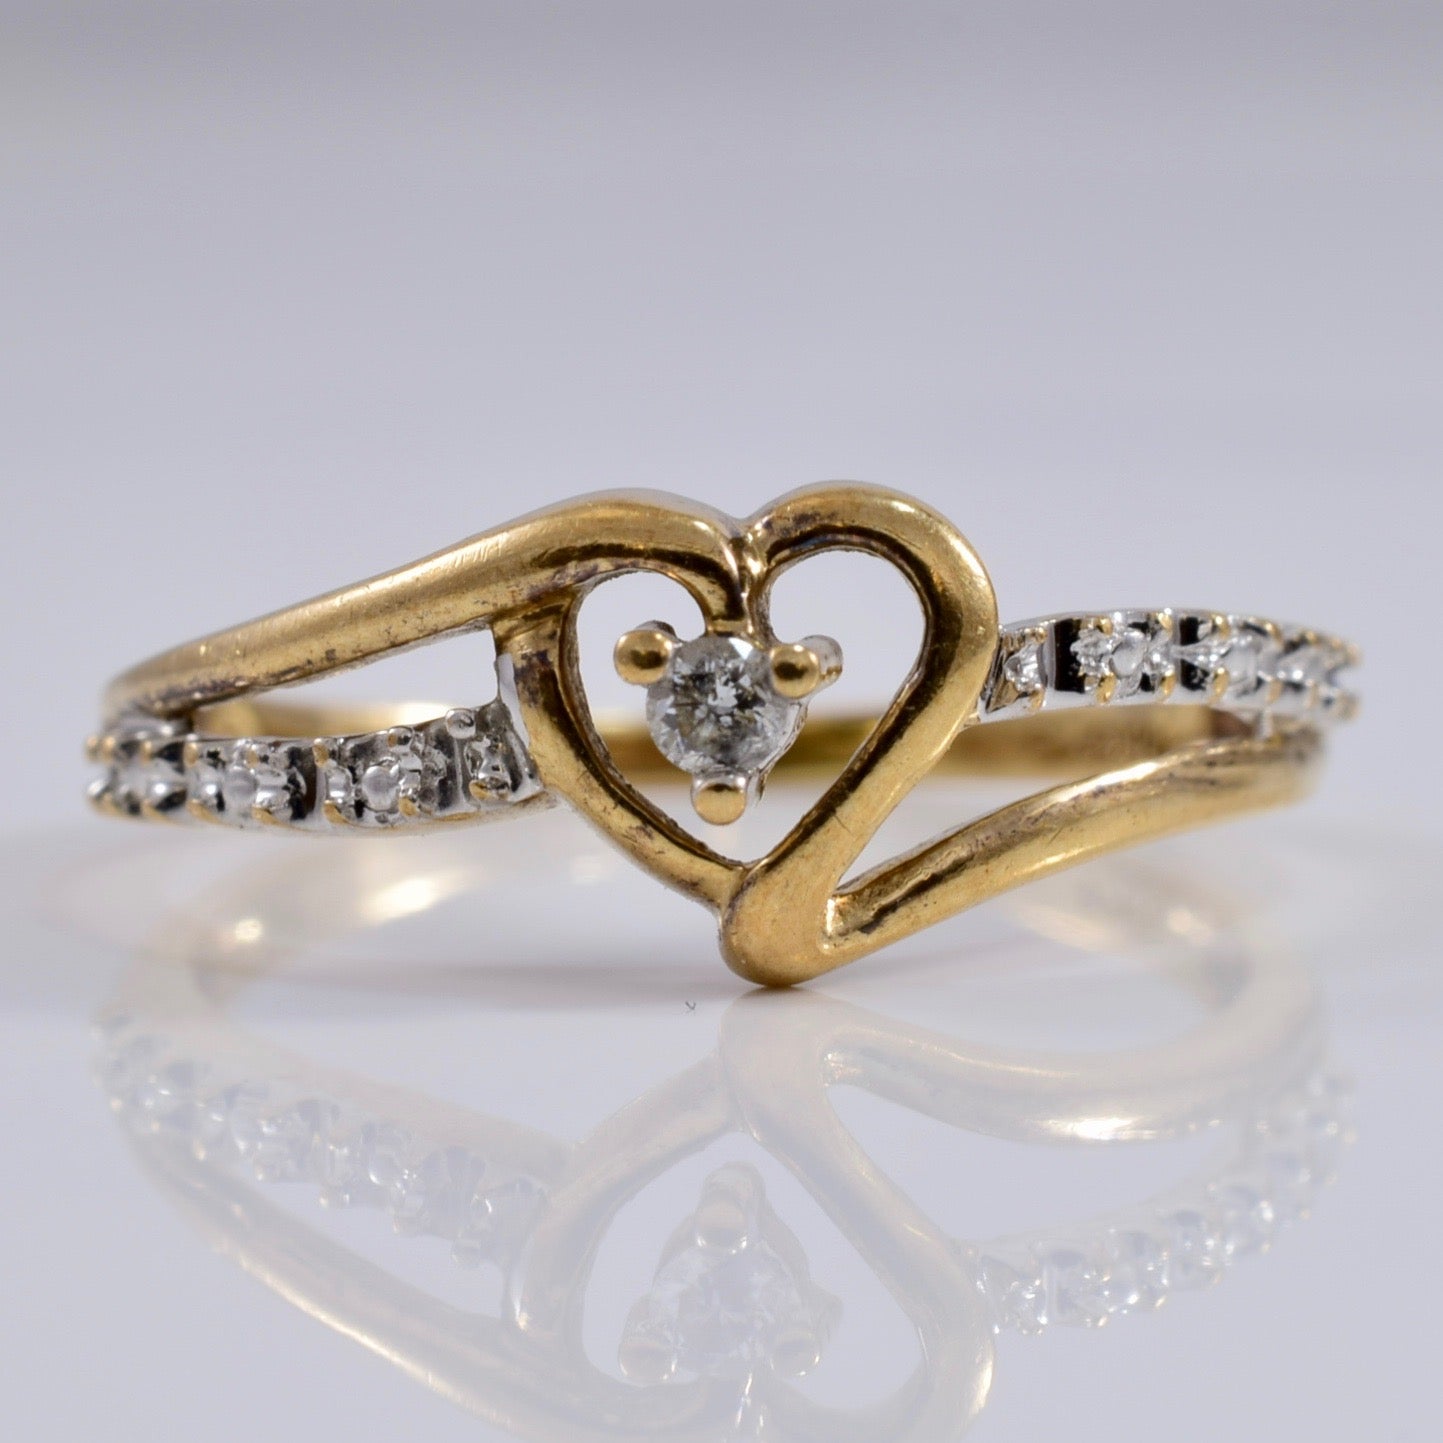 Heart Shaped Ring With Diamond Accents | 0.03 ctw SZ 5 |